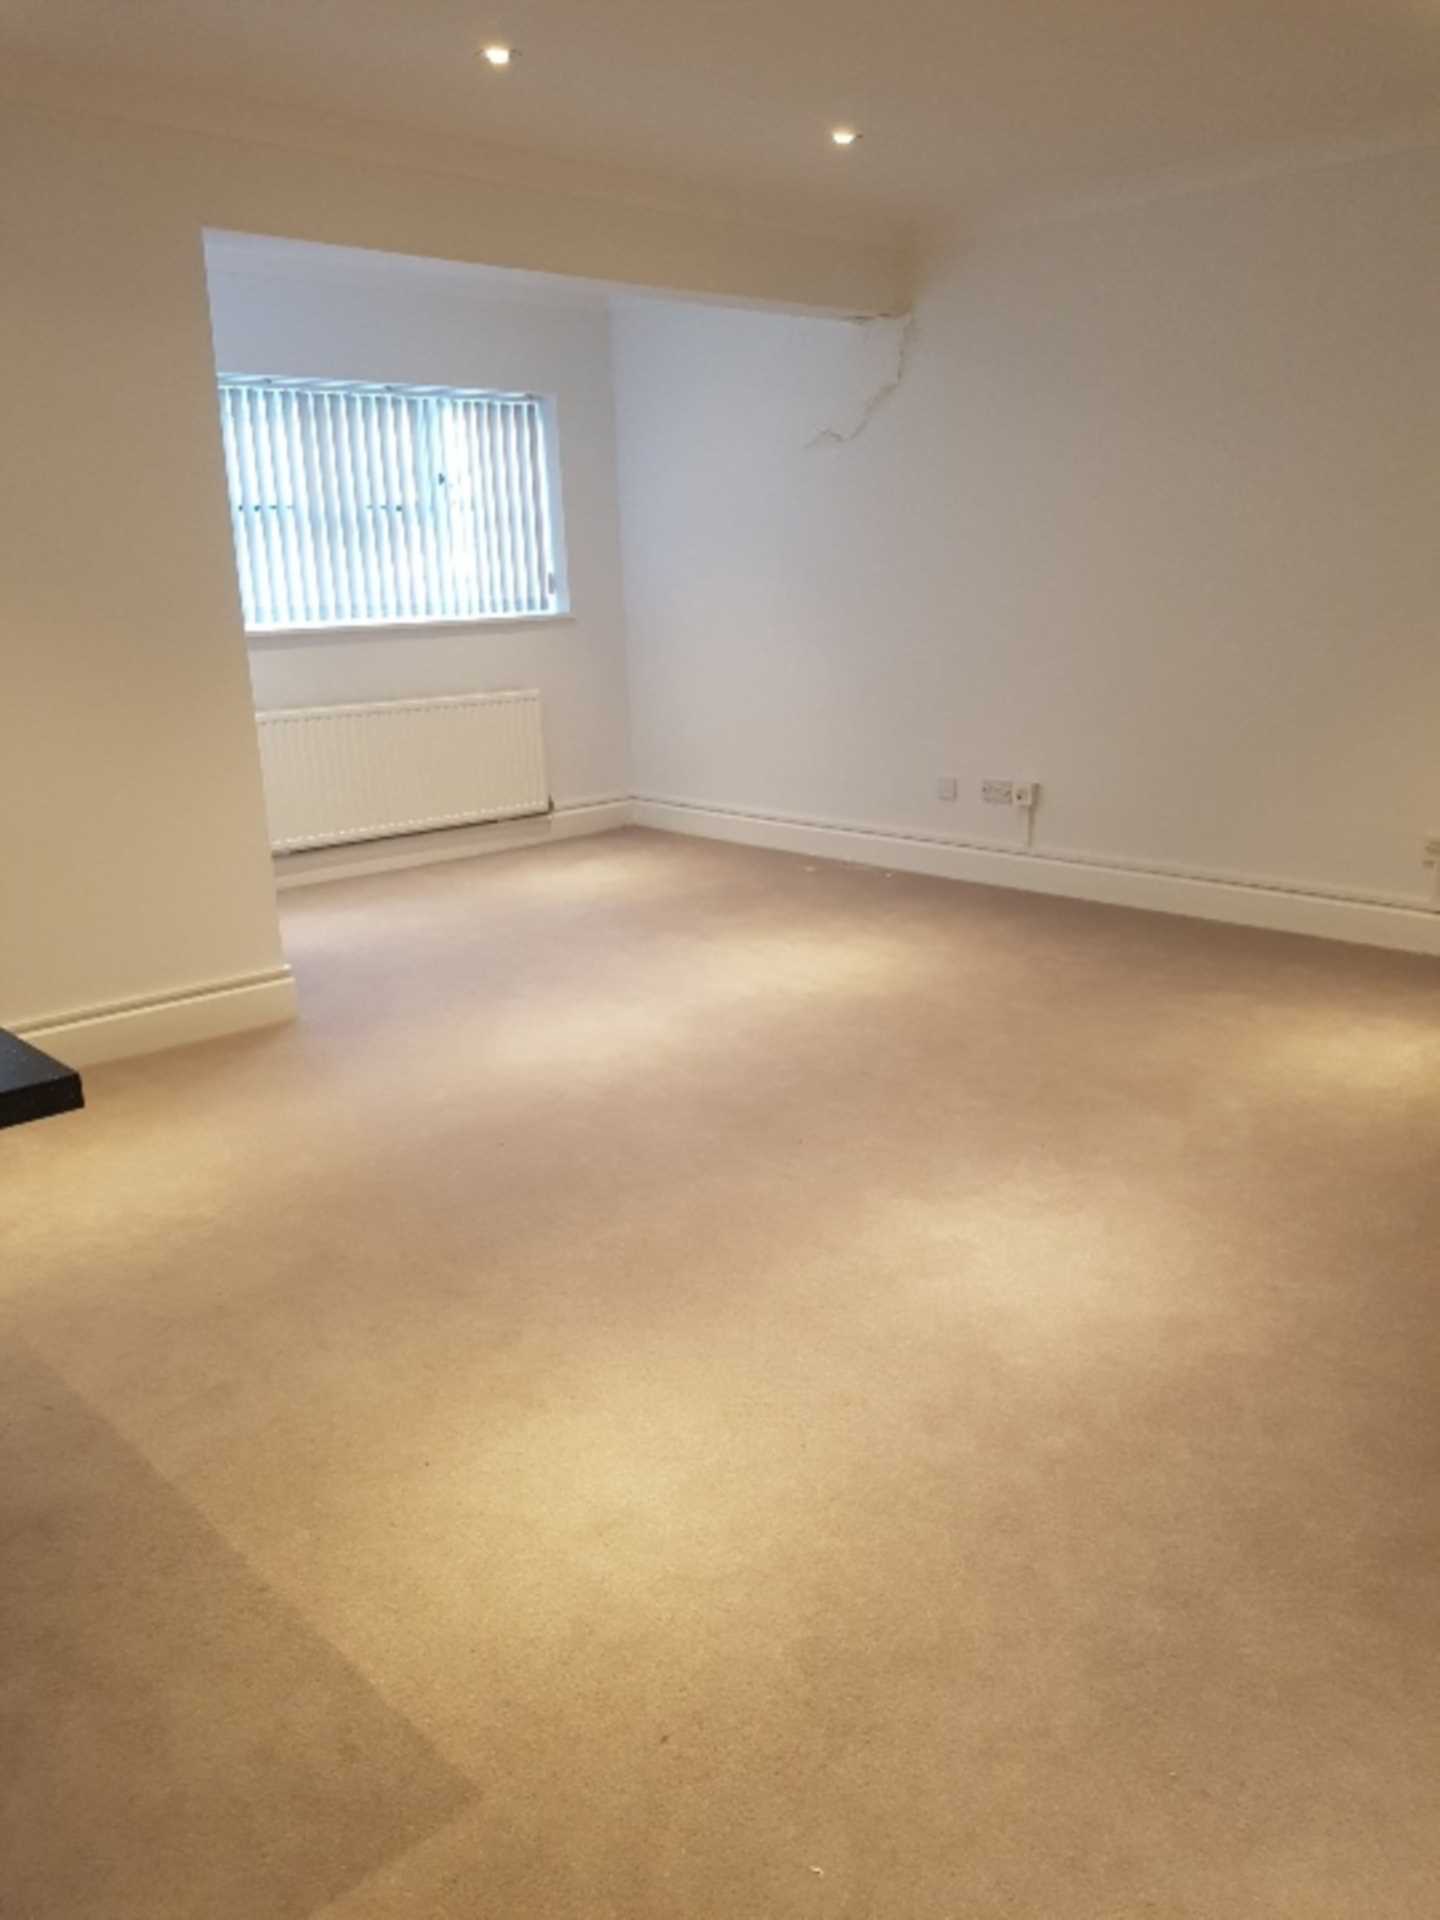 Office for rent in London. From Next Property - London